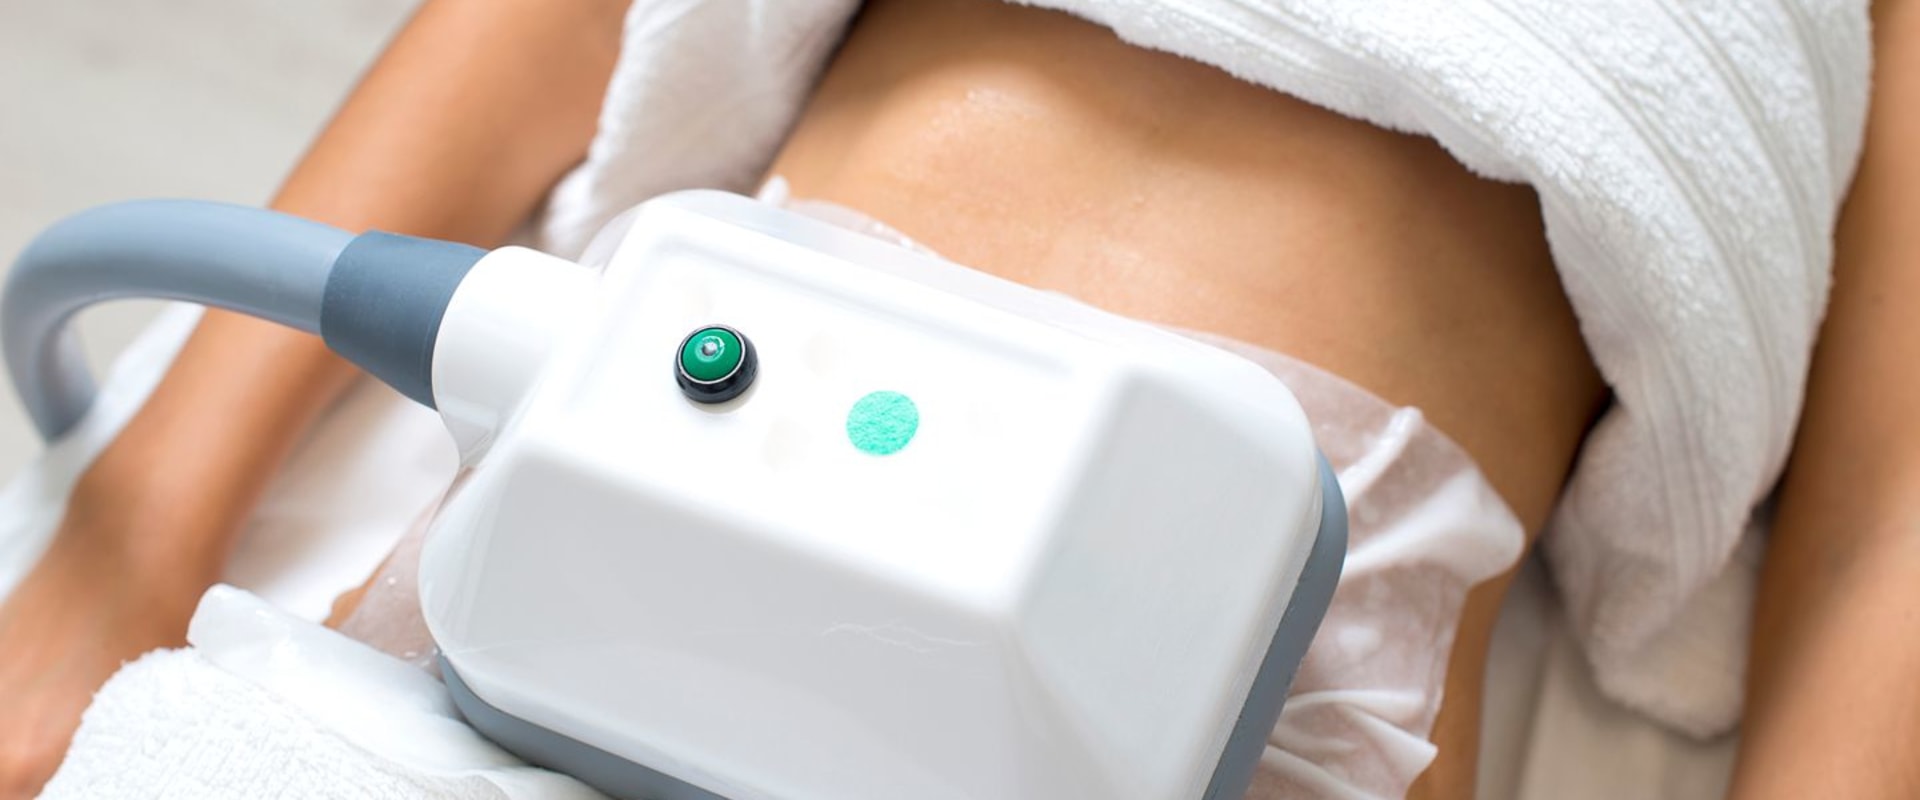 What Are the Side Effects of Fat Reduction Treatments?